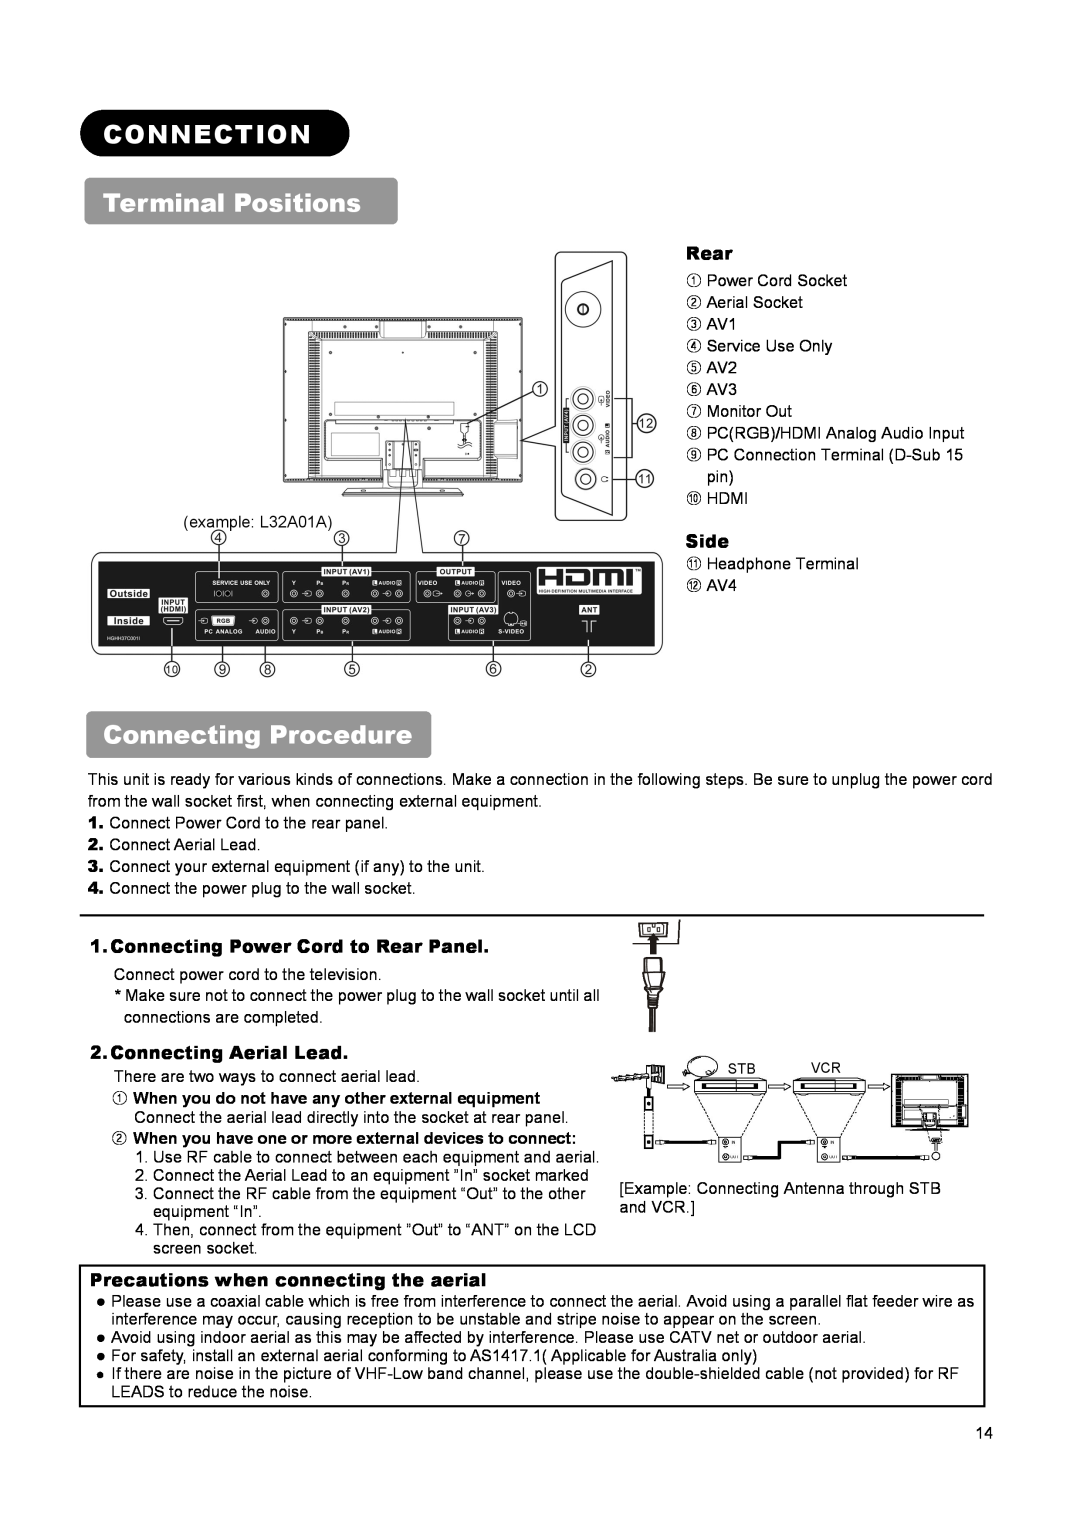 Hitachi L26A01A CONNECTION Terminal Positions, Connecting Procedure, Side, Connecting Power Cord to Rear Panel 